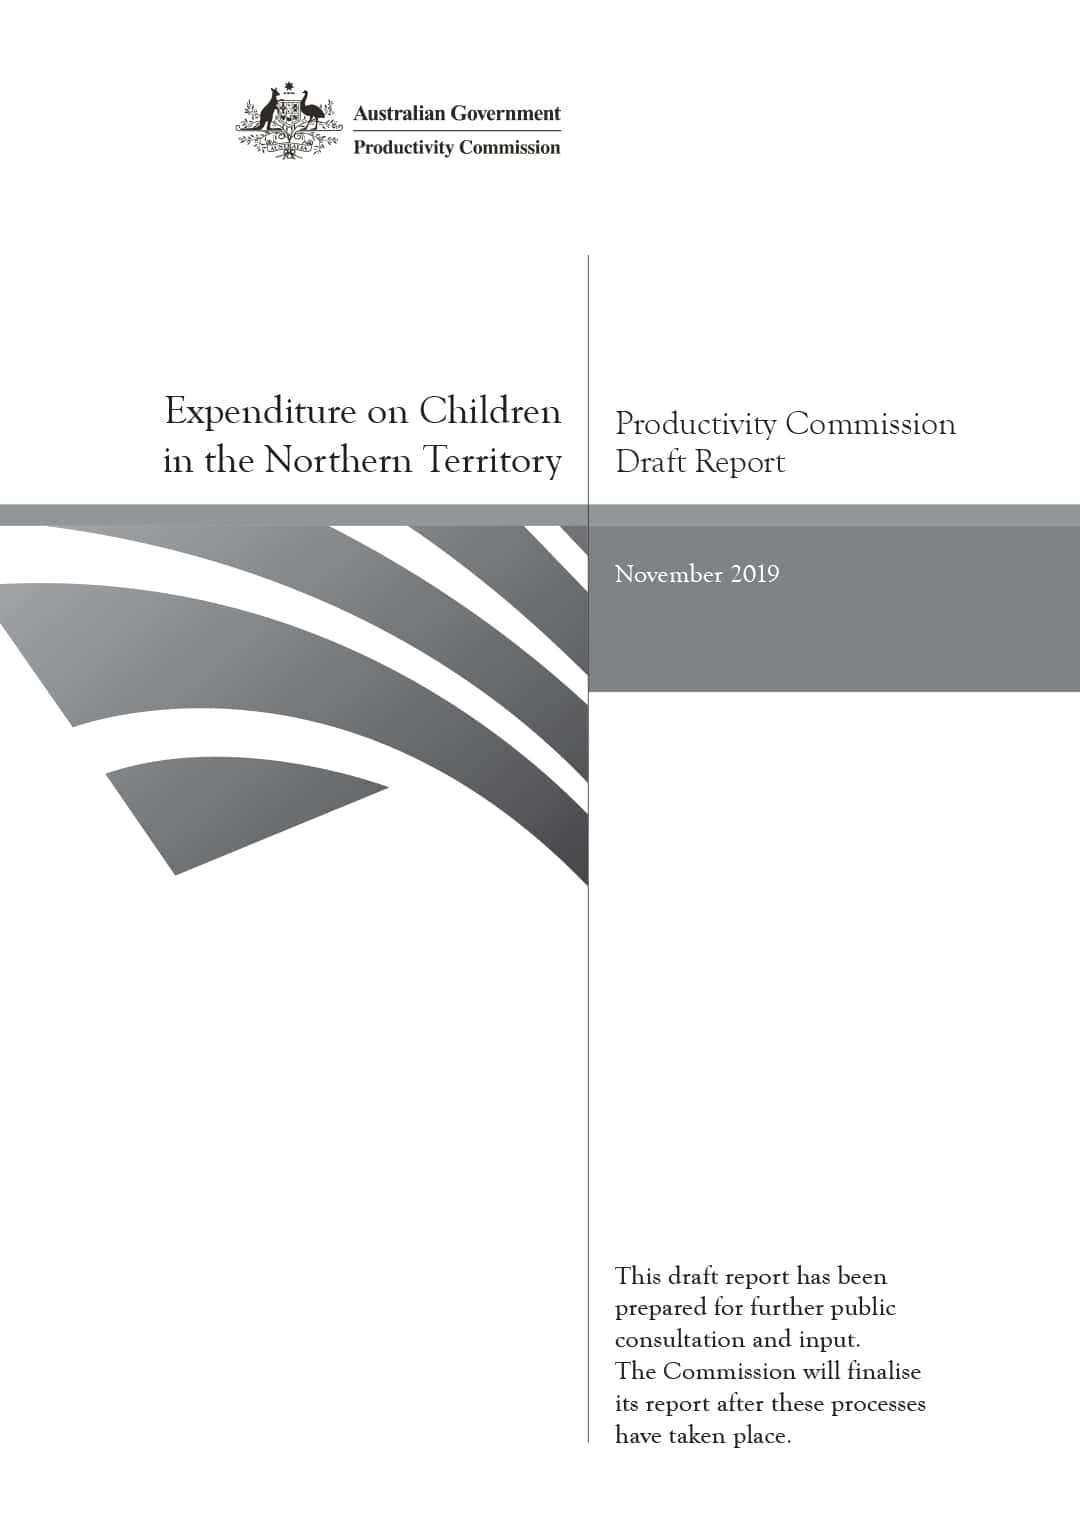 Productivity Commission - Expenditure on Children in the Northern Territory